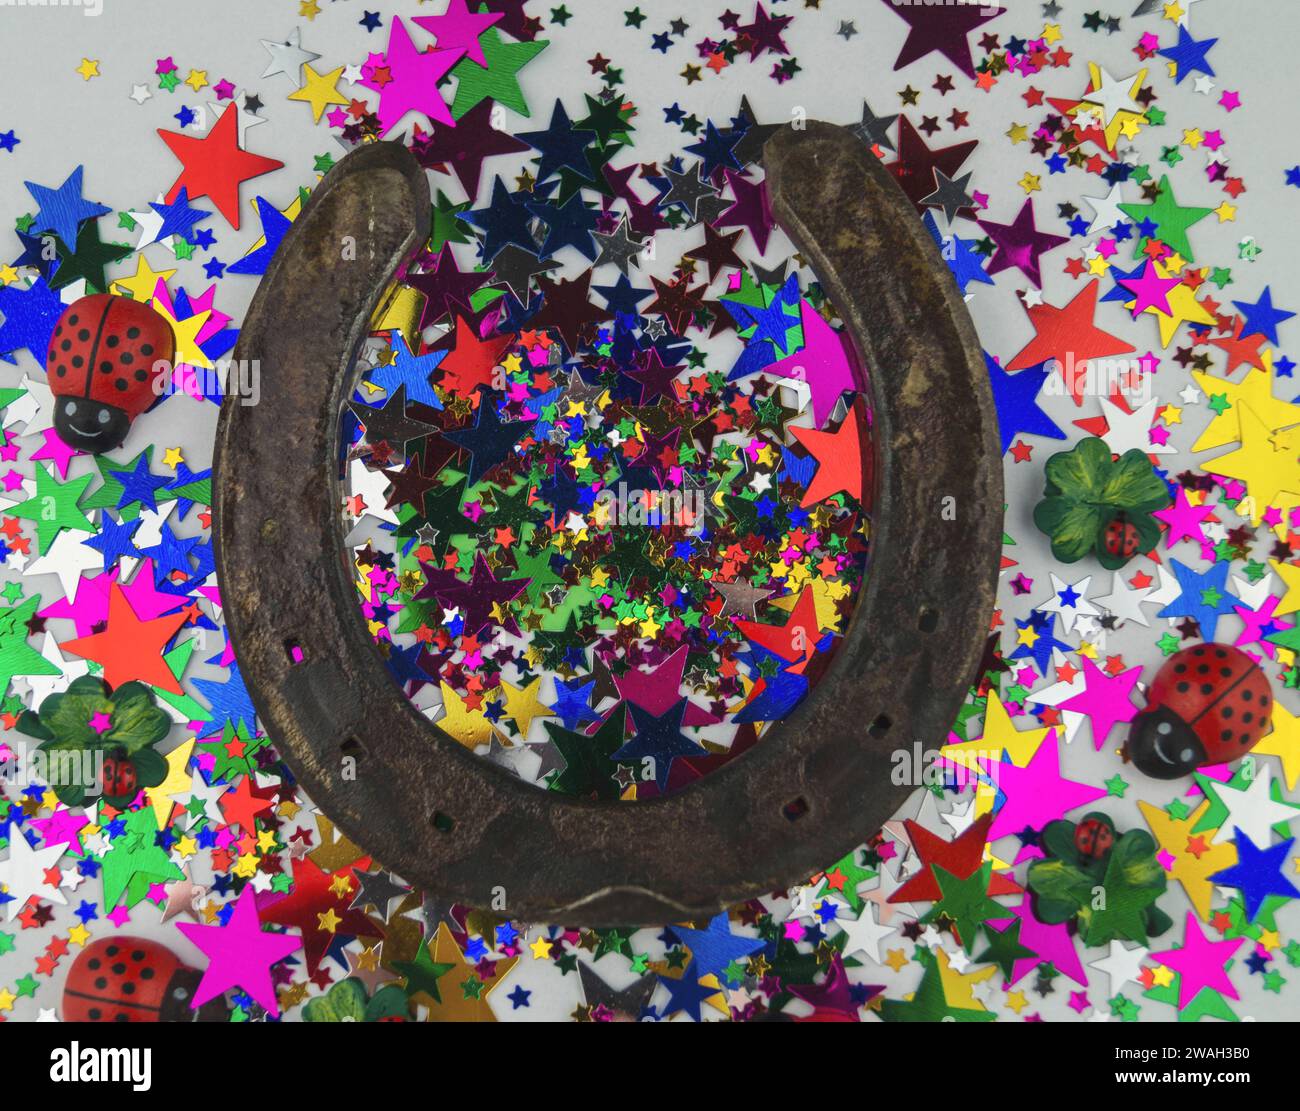 horseshoe and star glitter, lucky charms for New Year's Eve, symbolic image Stock Photo